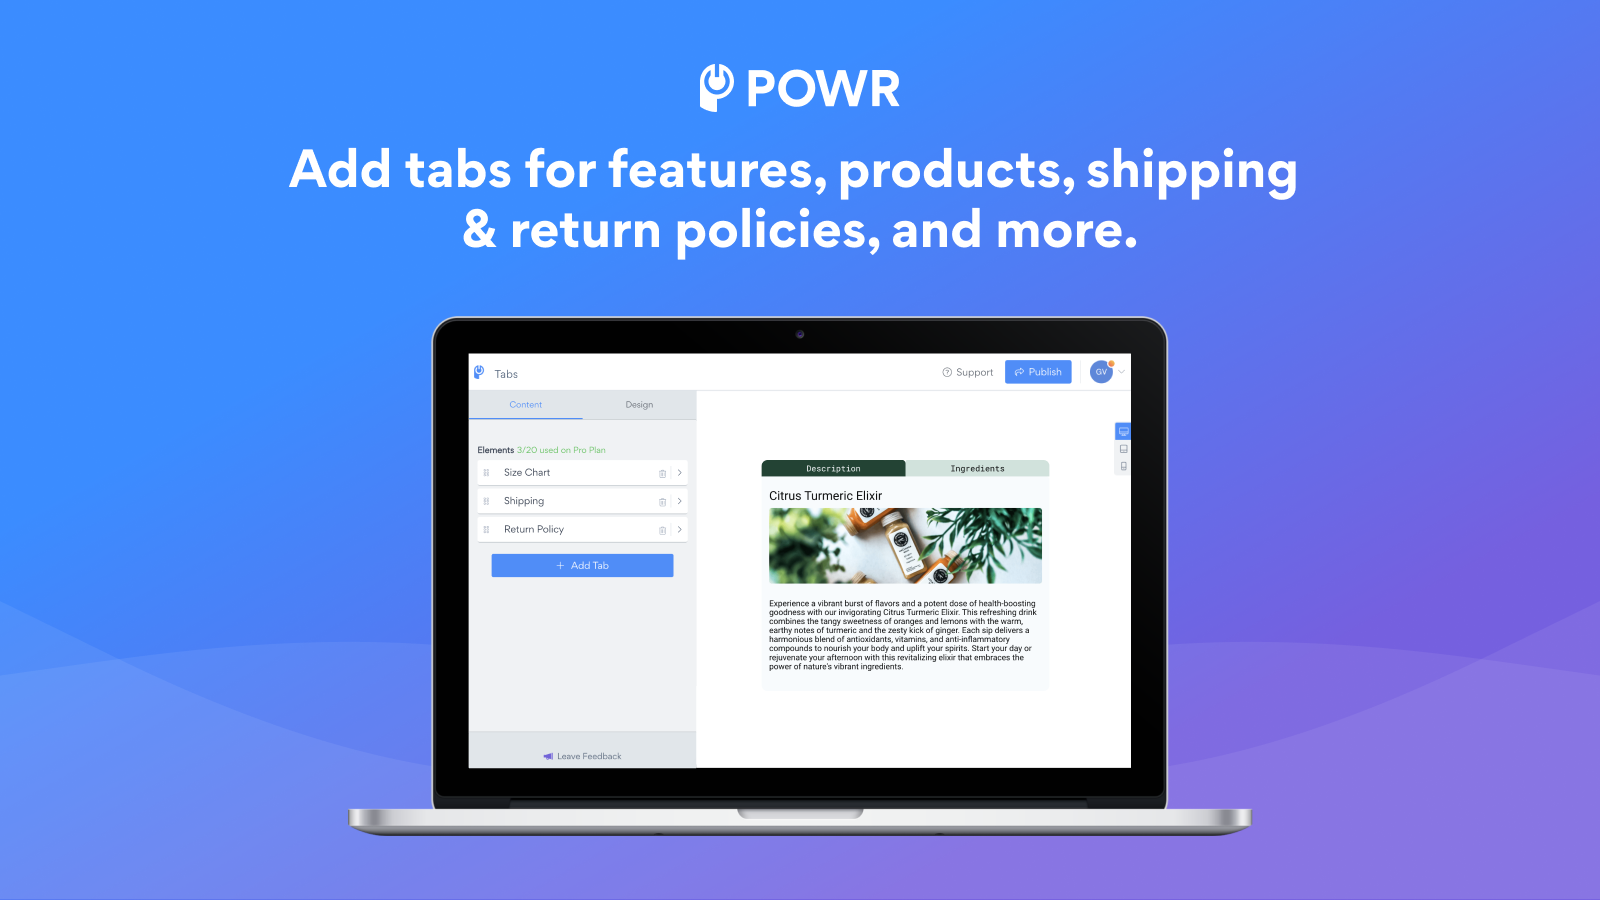 Add features, products, shipping and returns policies.